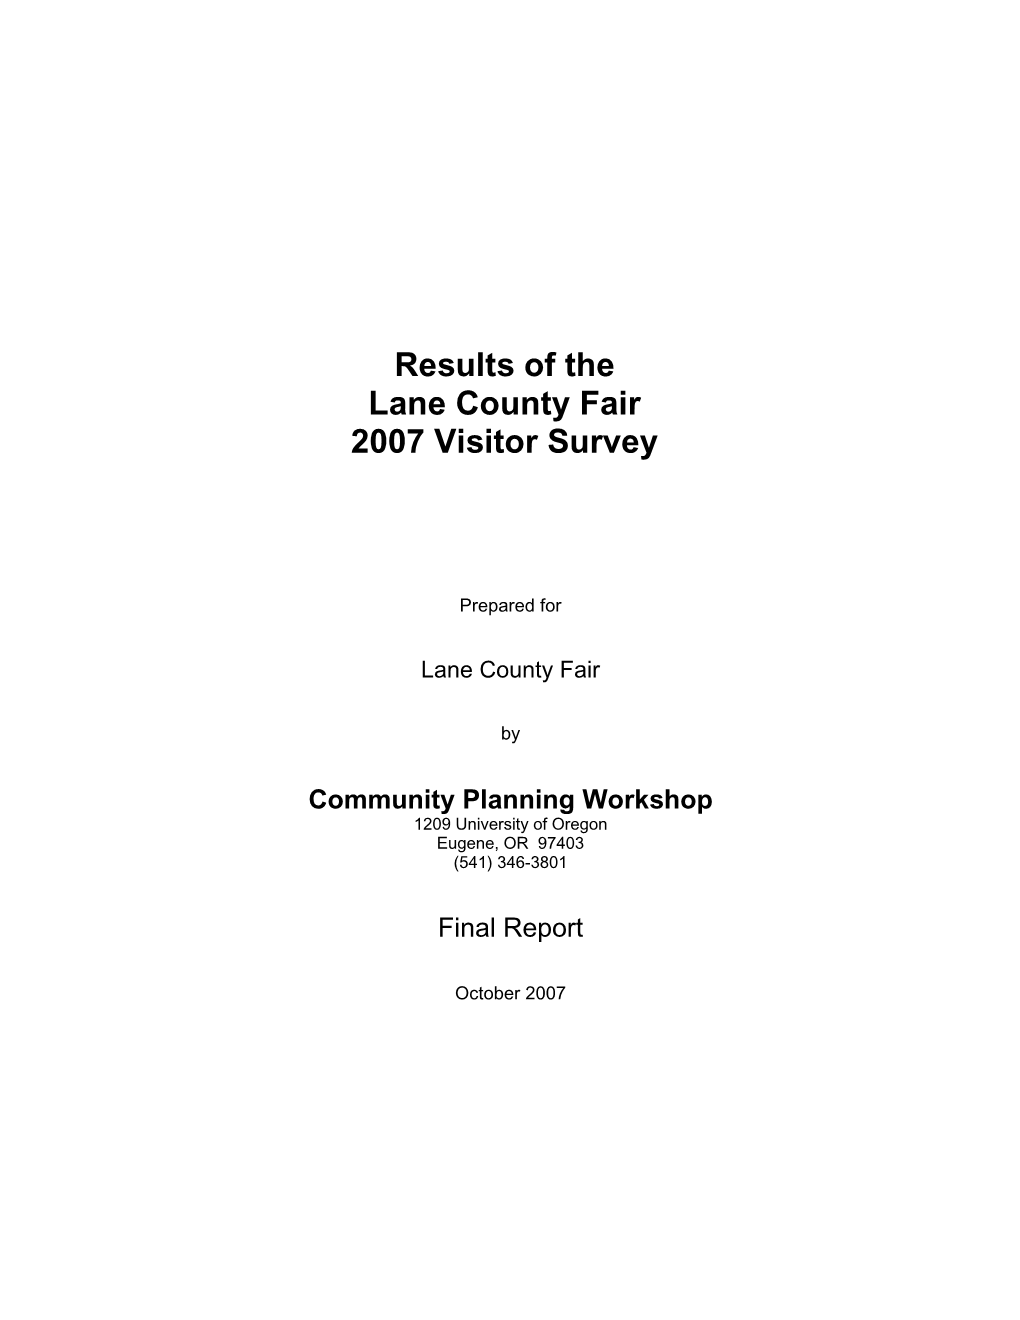 Results of the Lane County Fair 2007 Visitor Survey